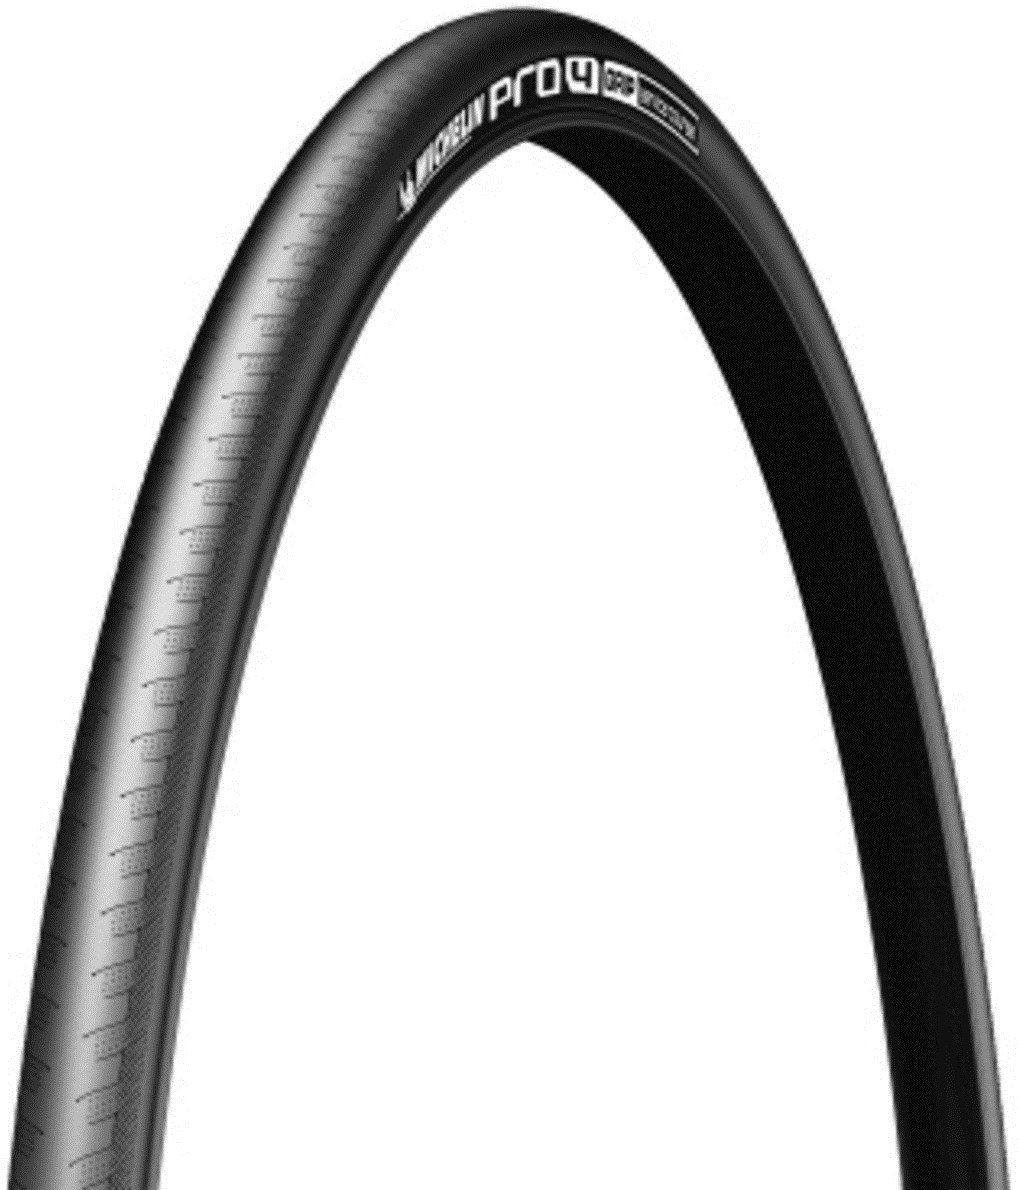 Michelin Pro 4 Grip Clincher Road Bike Tyre product image